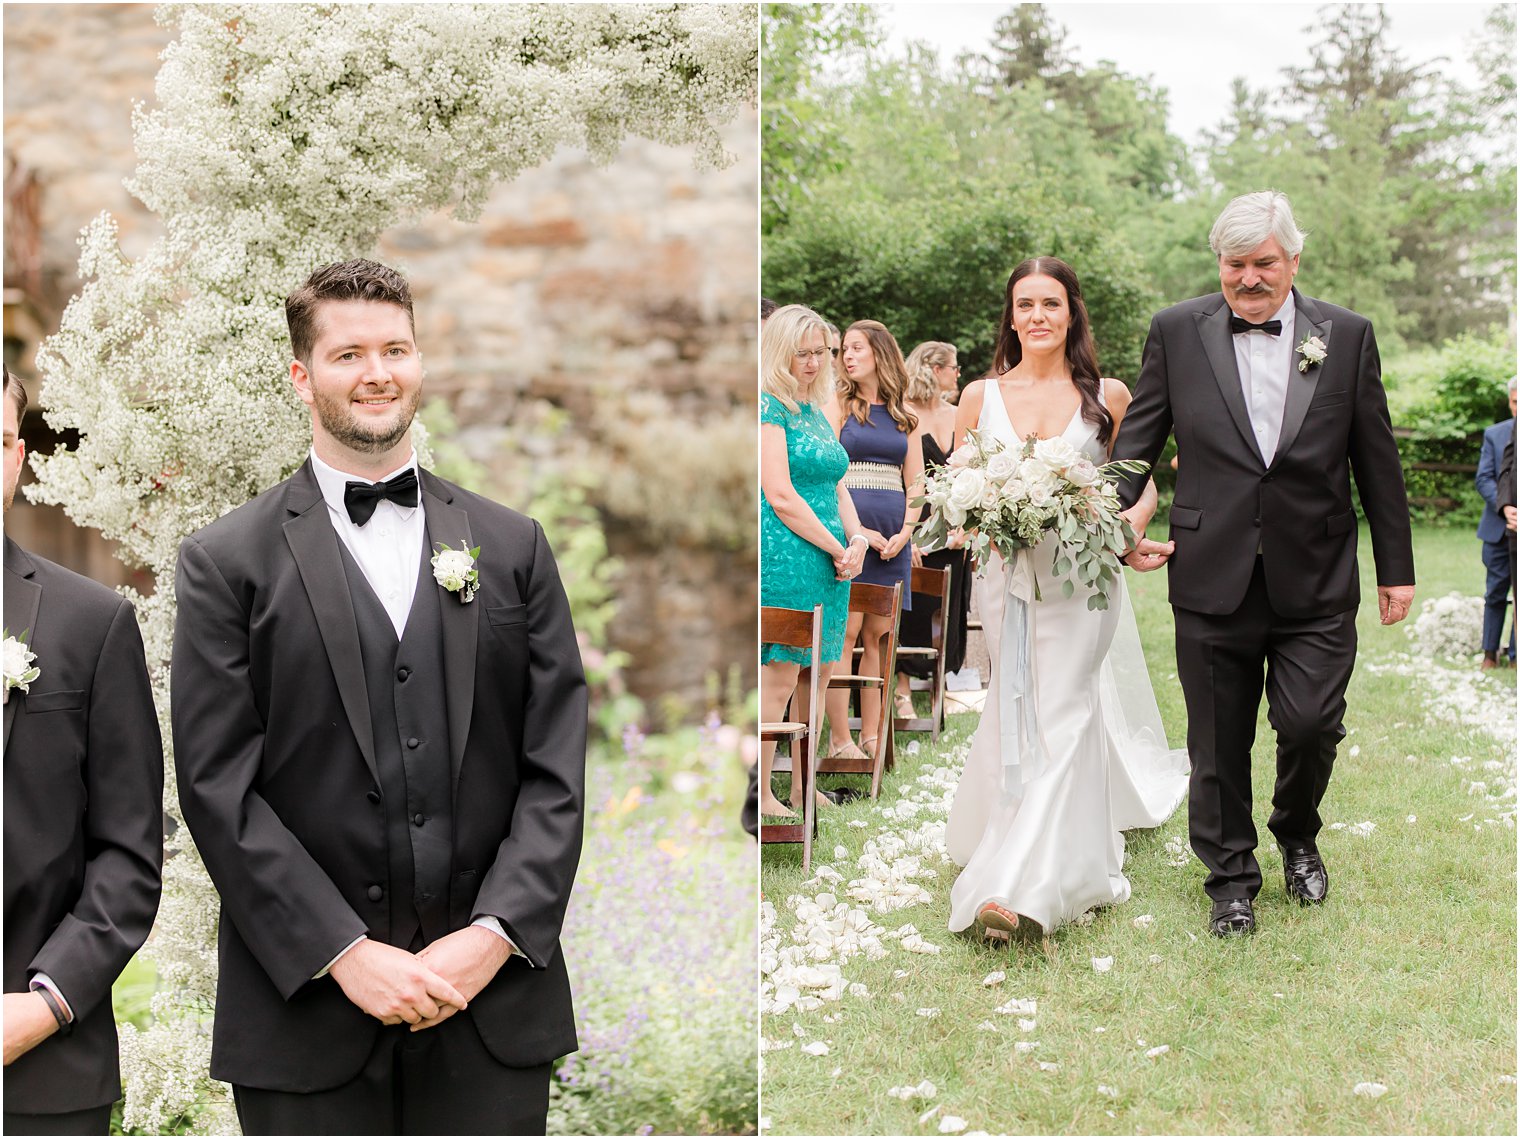 groom seeing bride's processional as she walks down the aisle with her father